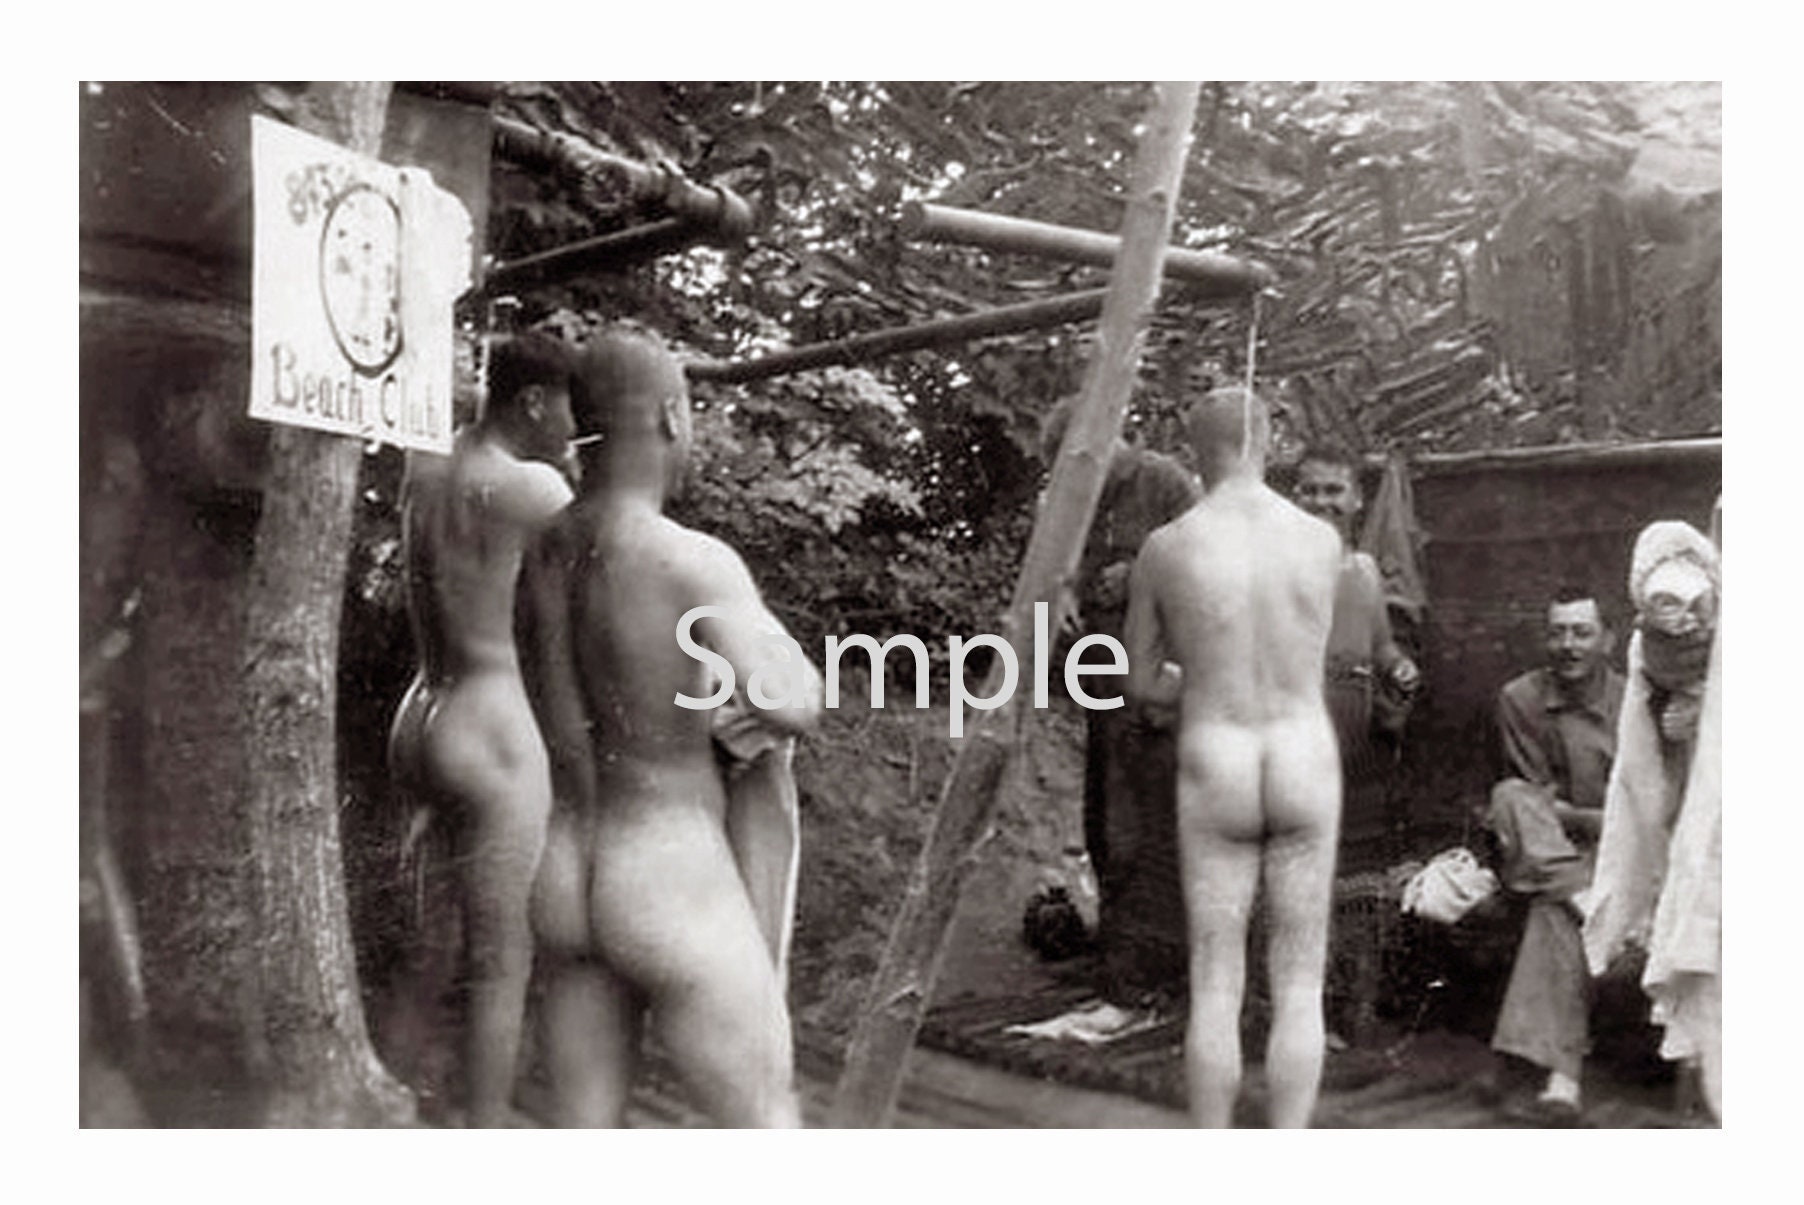 Vintage Camera Club Nudes - Vintage Reprint of a 1940's Photo of Nude WWII Marines - Etsy Finland